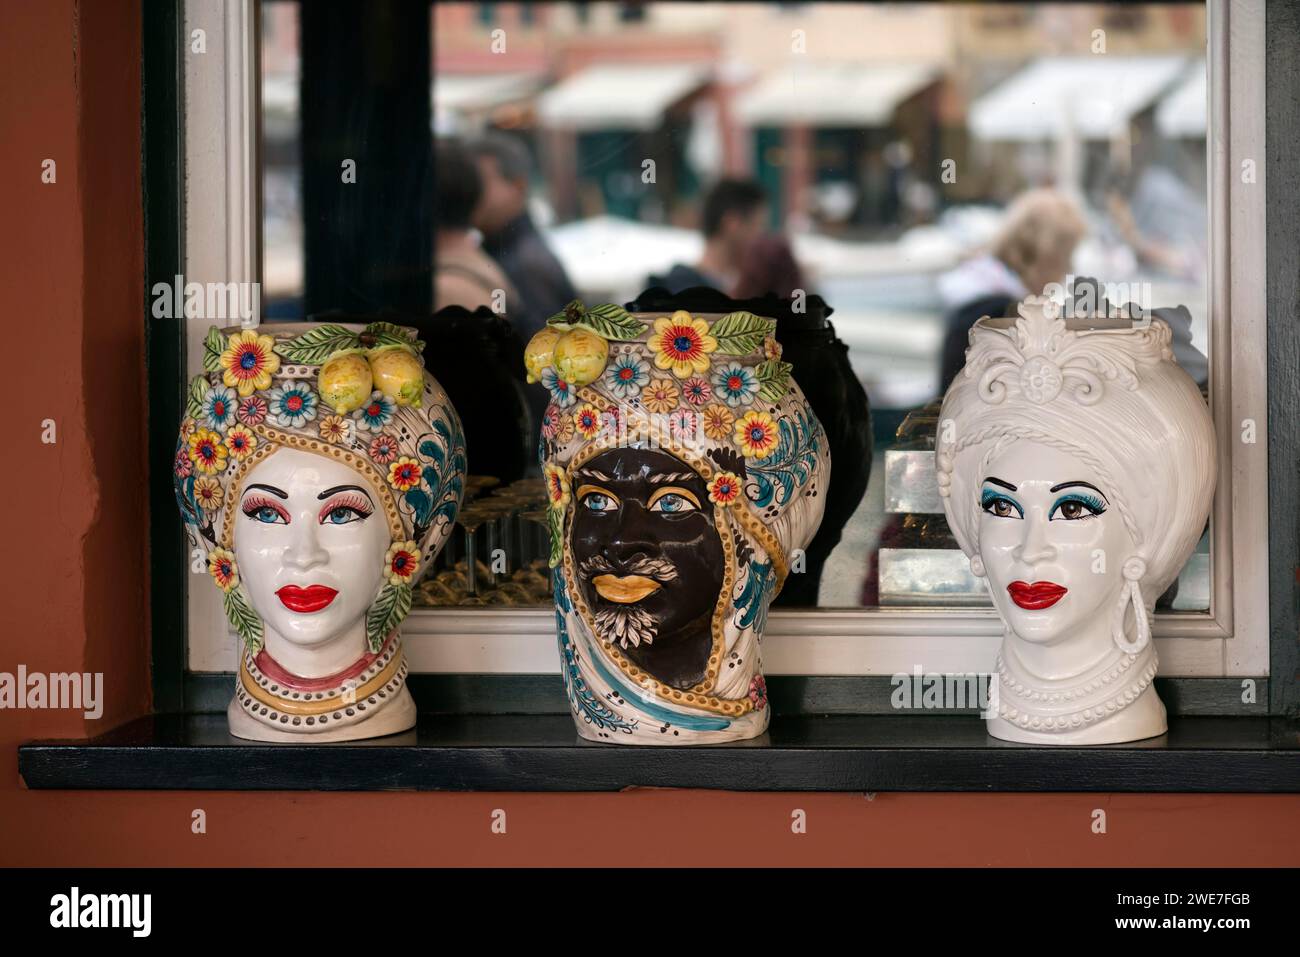 Decorative vases designed with Indian faces, in the window of an Indian restaurant, Portofino, Italy Stock Photo